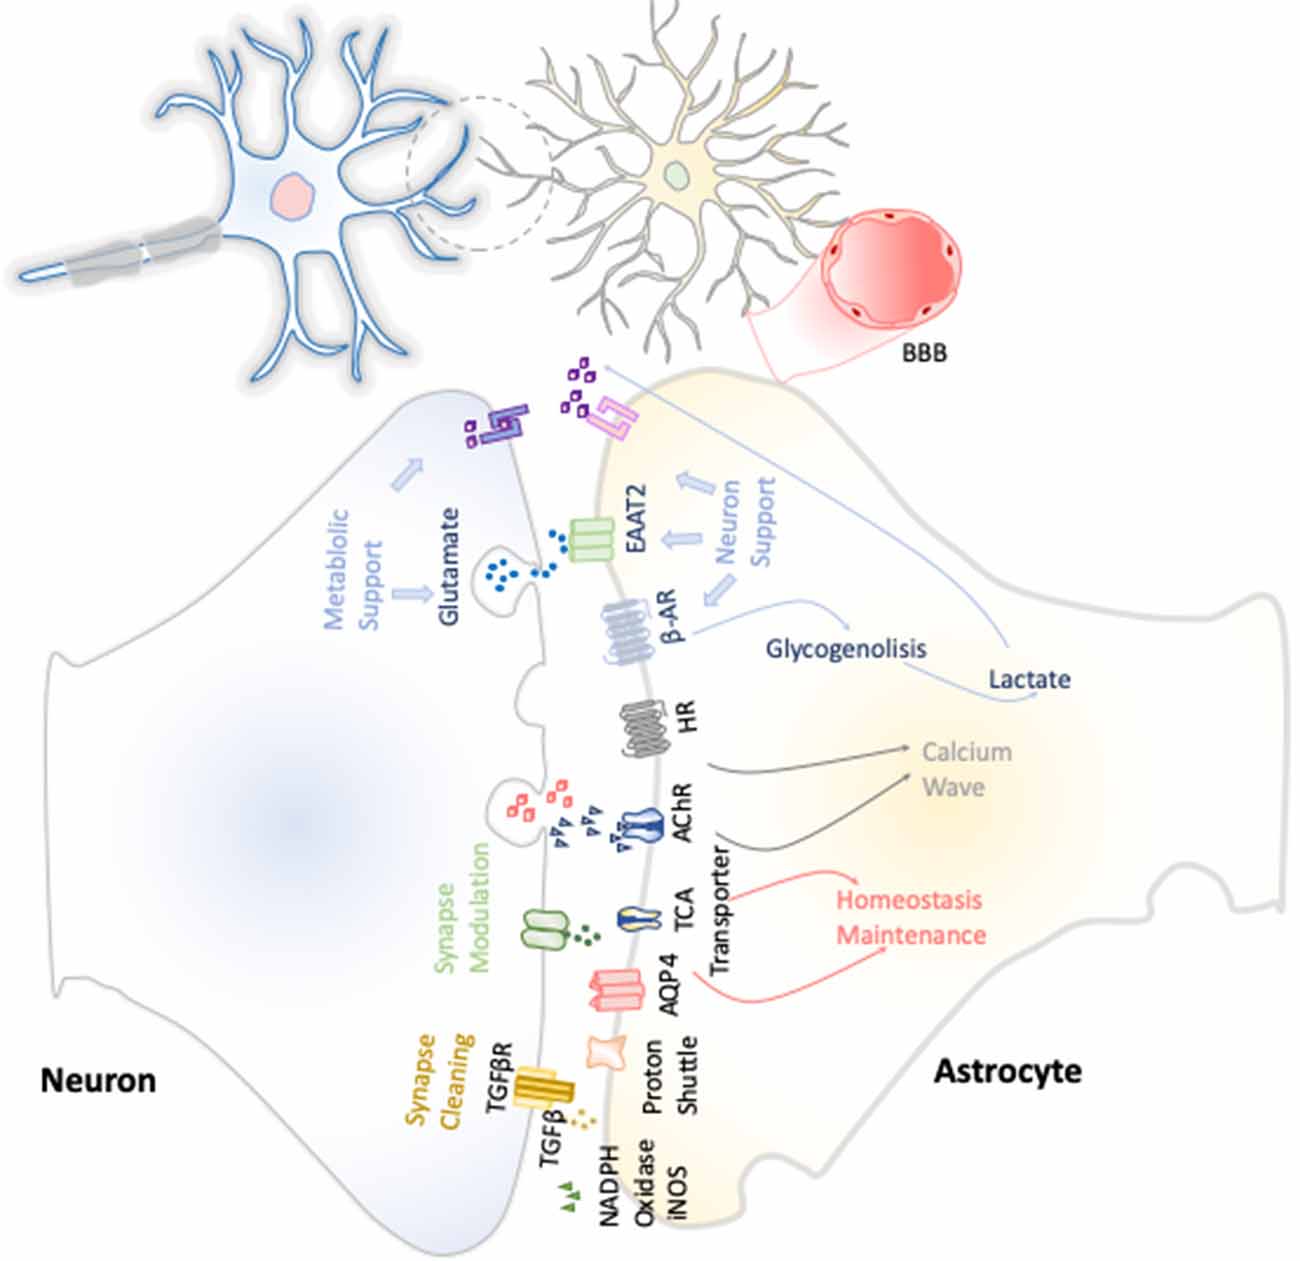 Astrocyte recruitment is augmented within the calcium wave in the VPA